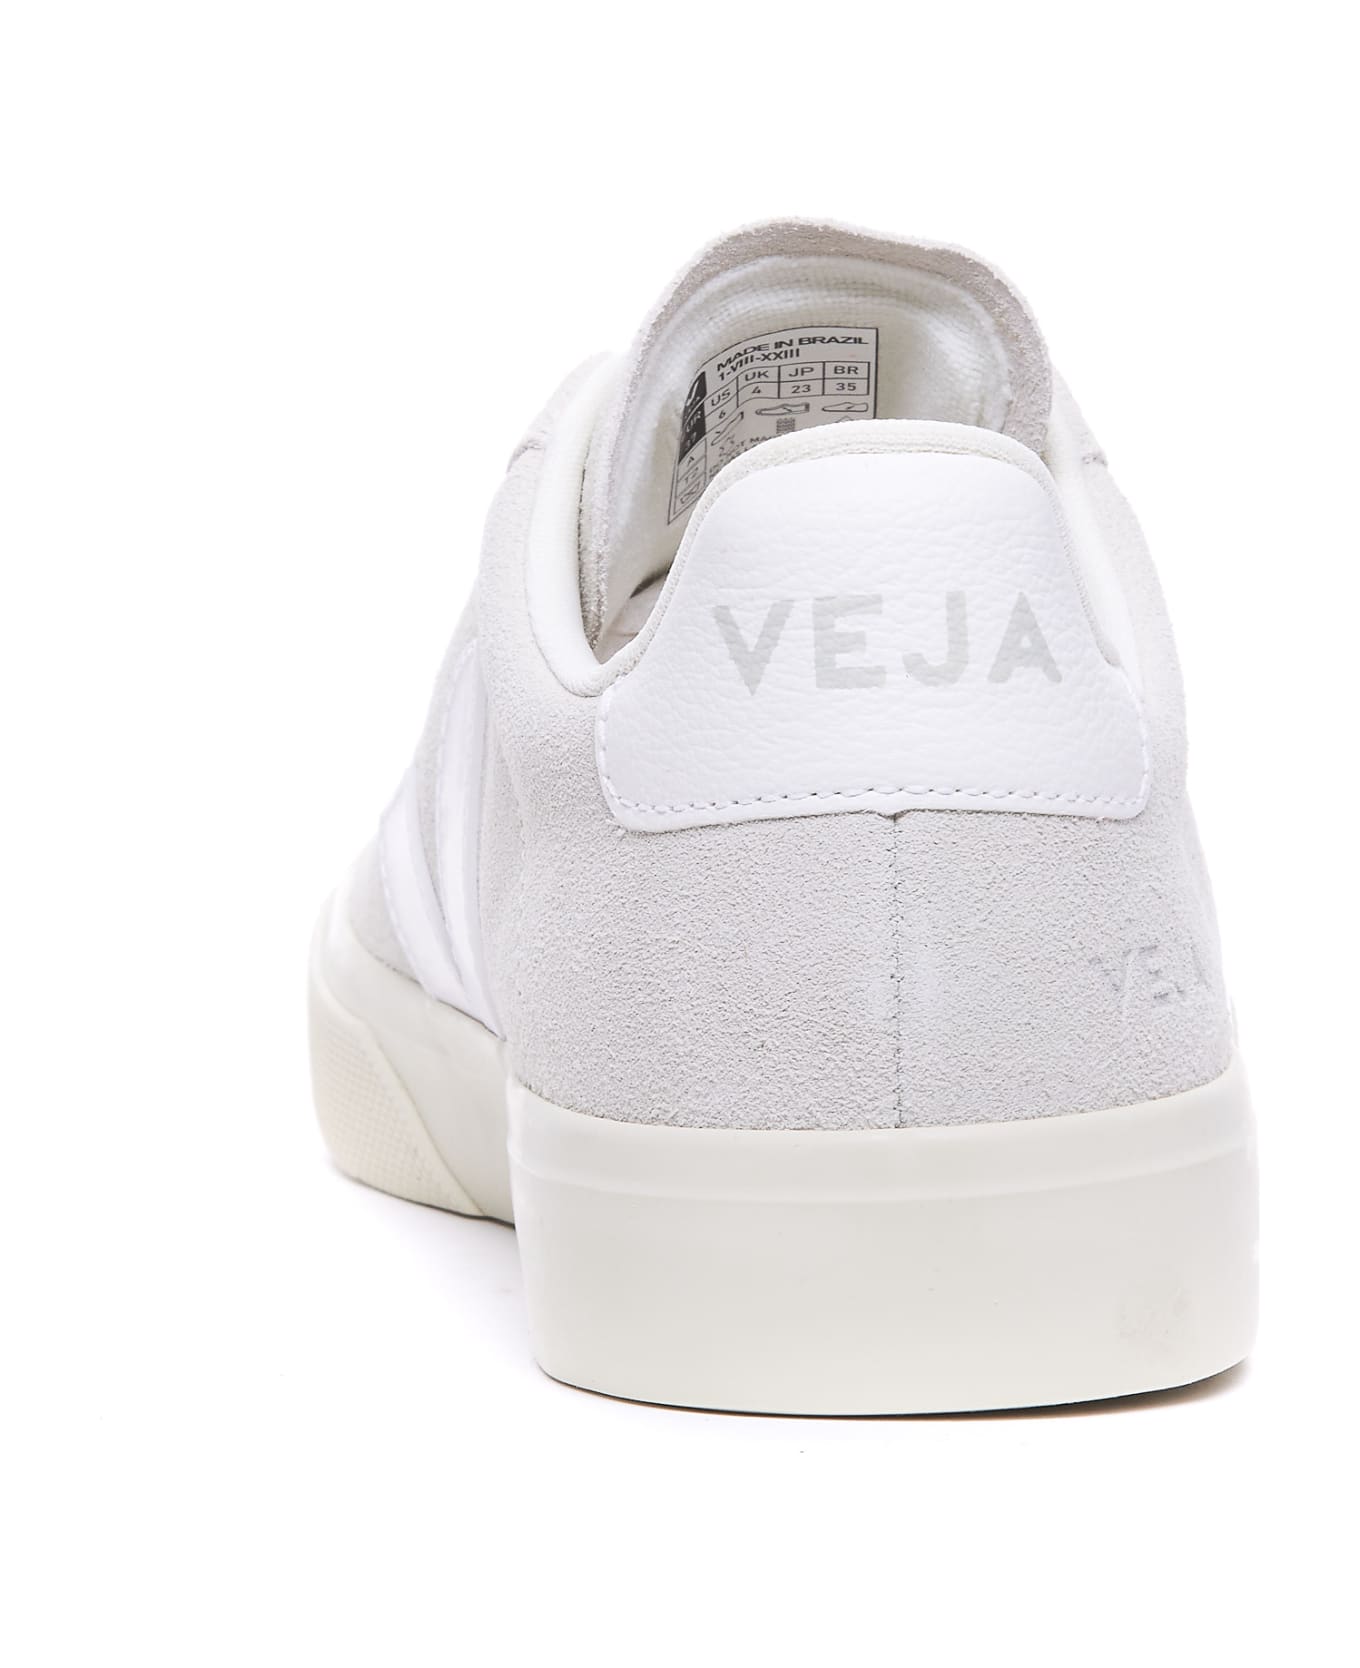 Veja Campo Sneakers - Grey スニーカー